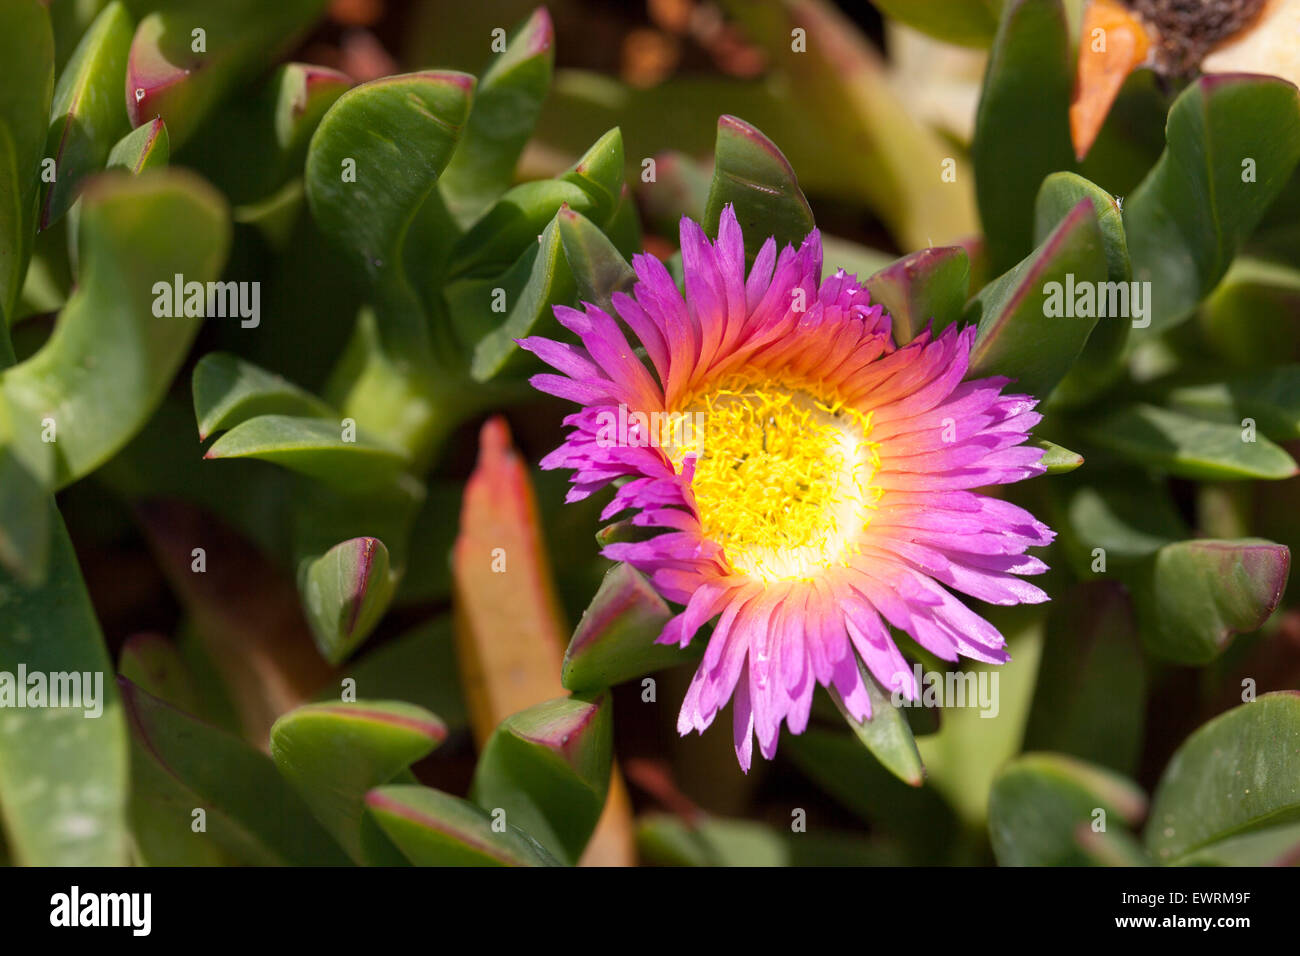 Green Ice Plants with bright pink and yellow flowers blooming Stock Photo